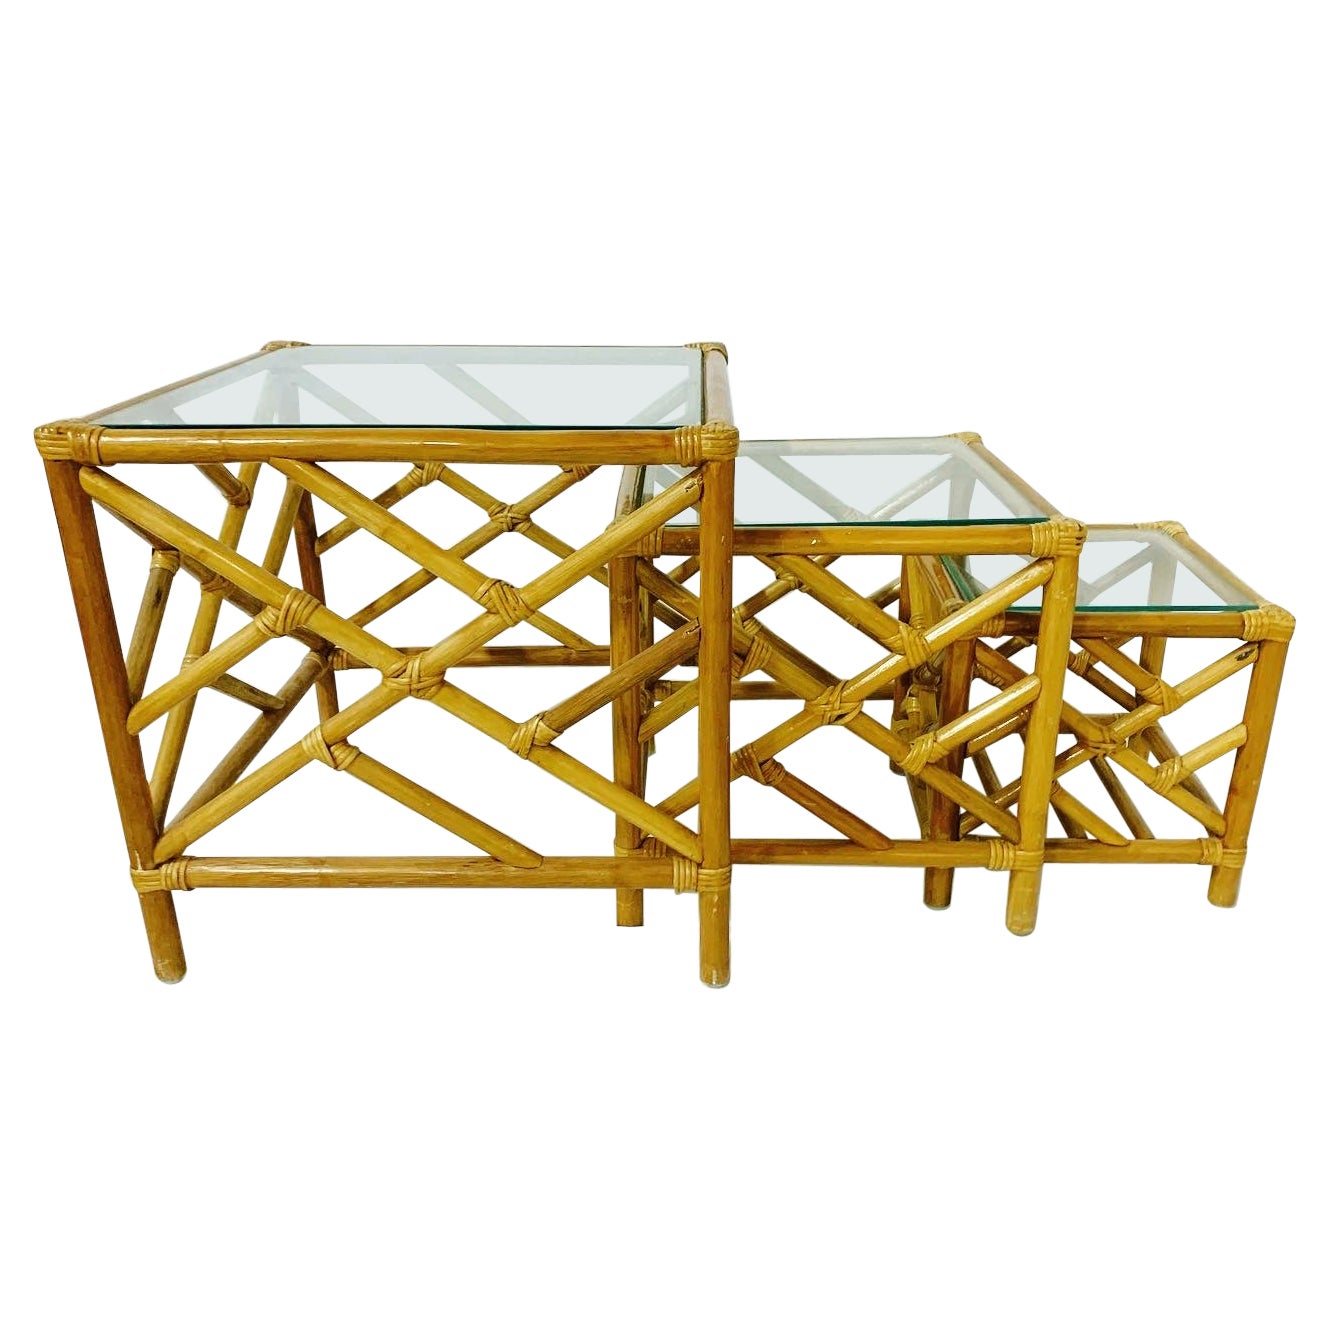 Chippendale Bamboo Rattan Nesting Tables - Set of 3 For Sale